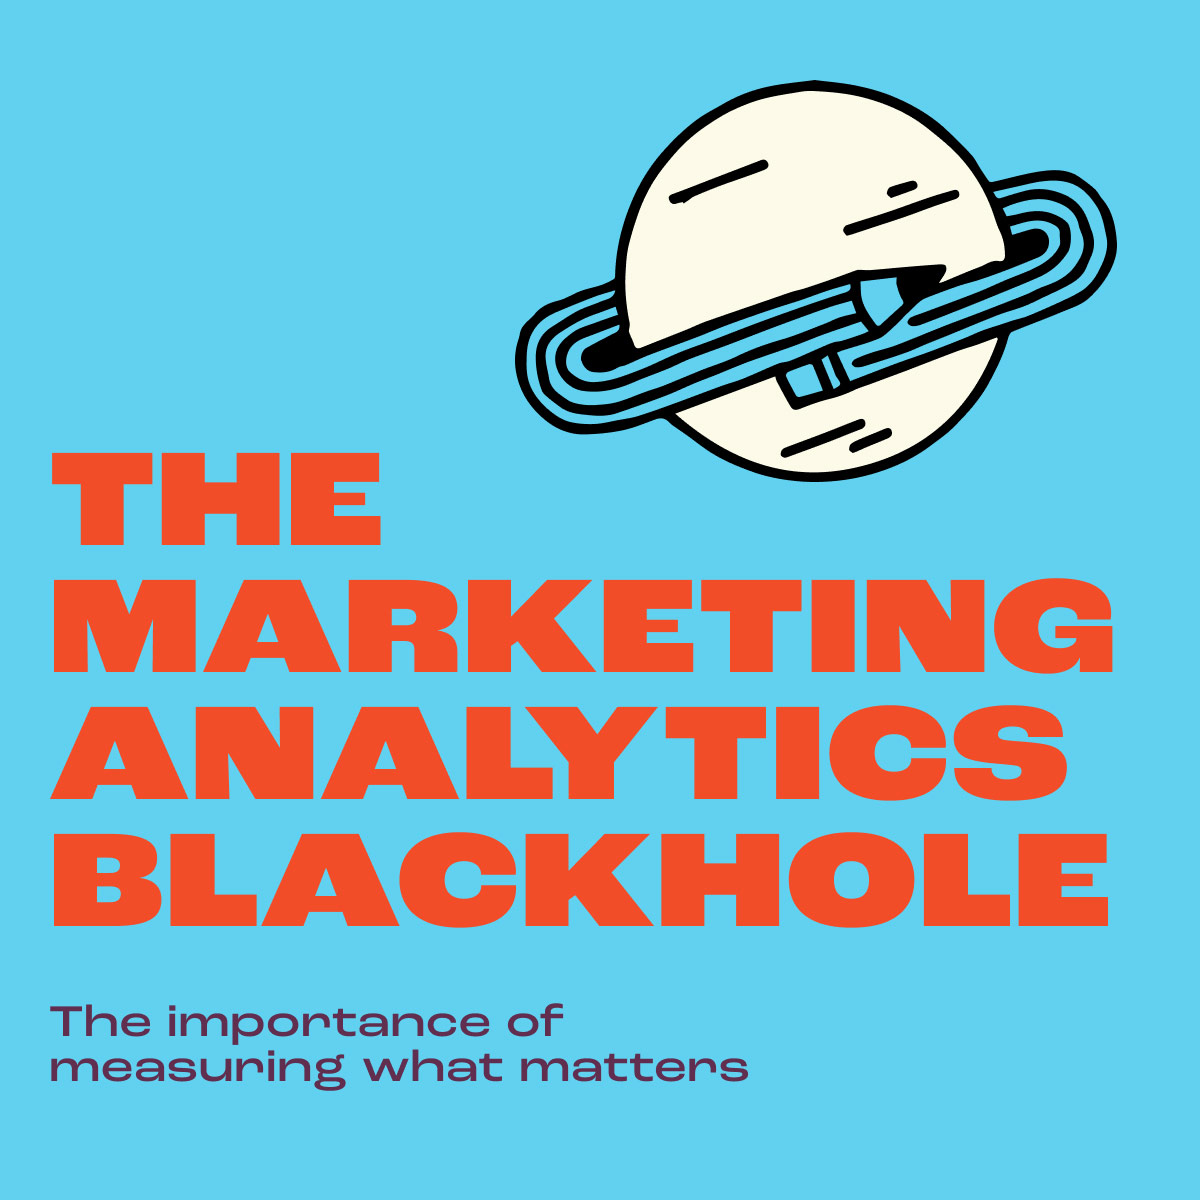 THE MARKETING ANALYTICS BLACKHOLE: THE IMPORTANCE OF MEASURING WHAT MATTERS